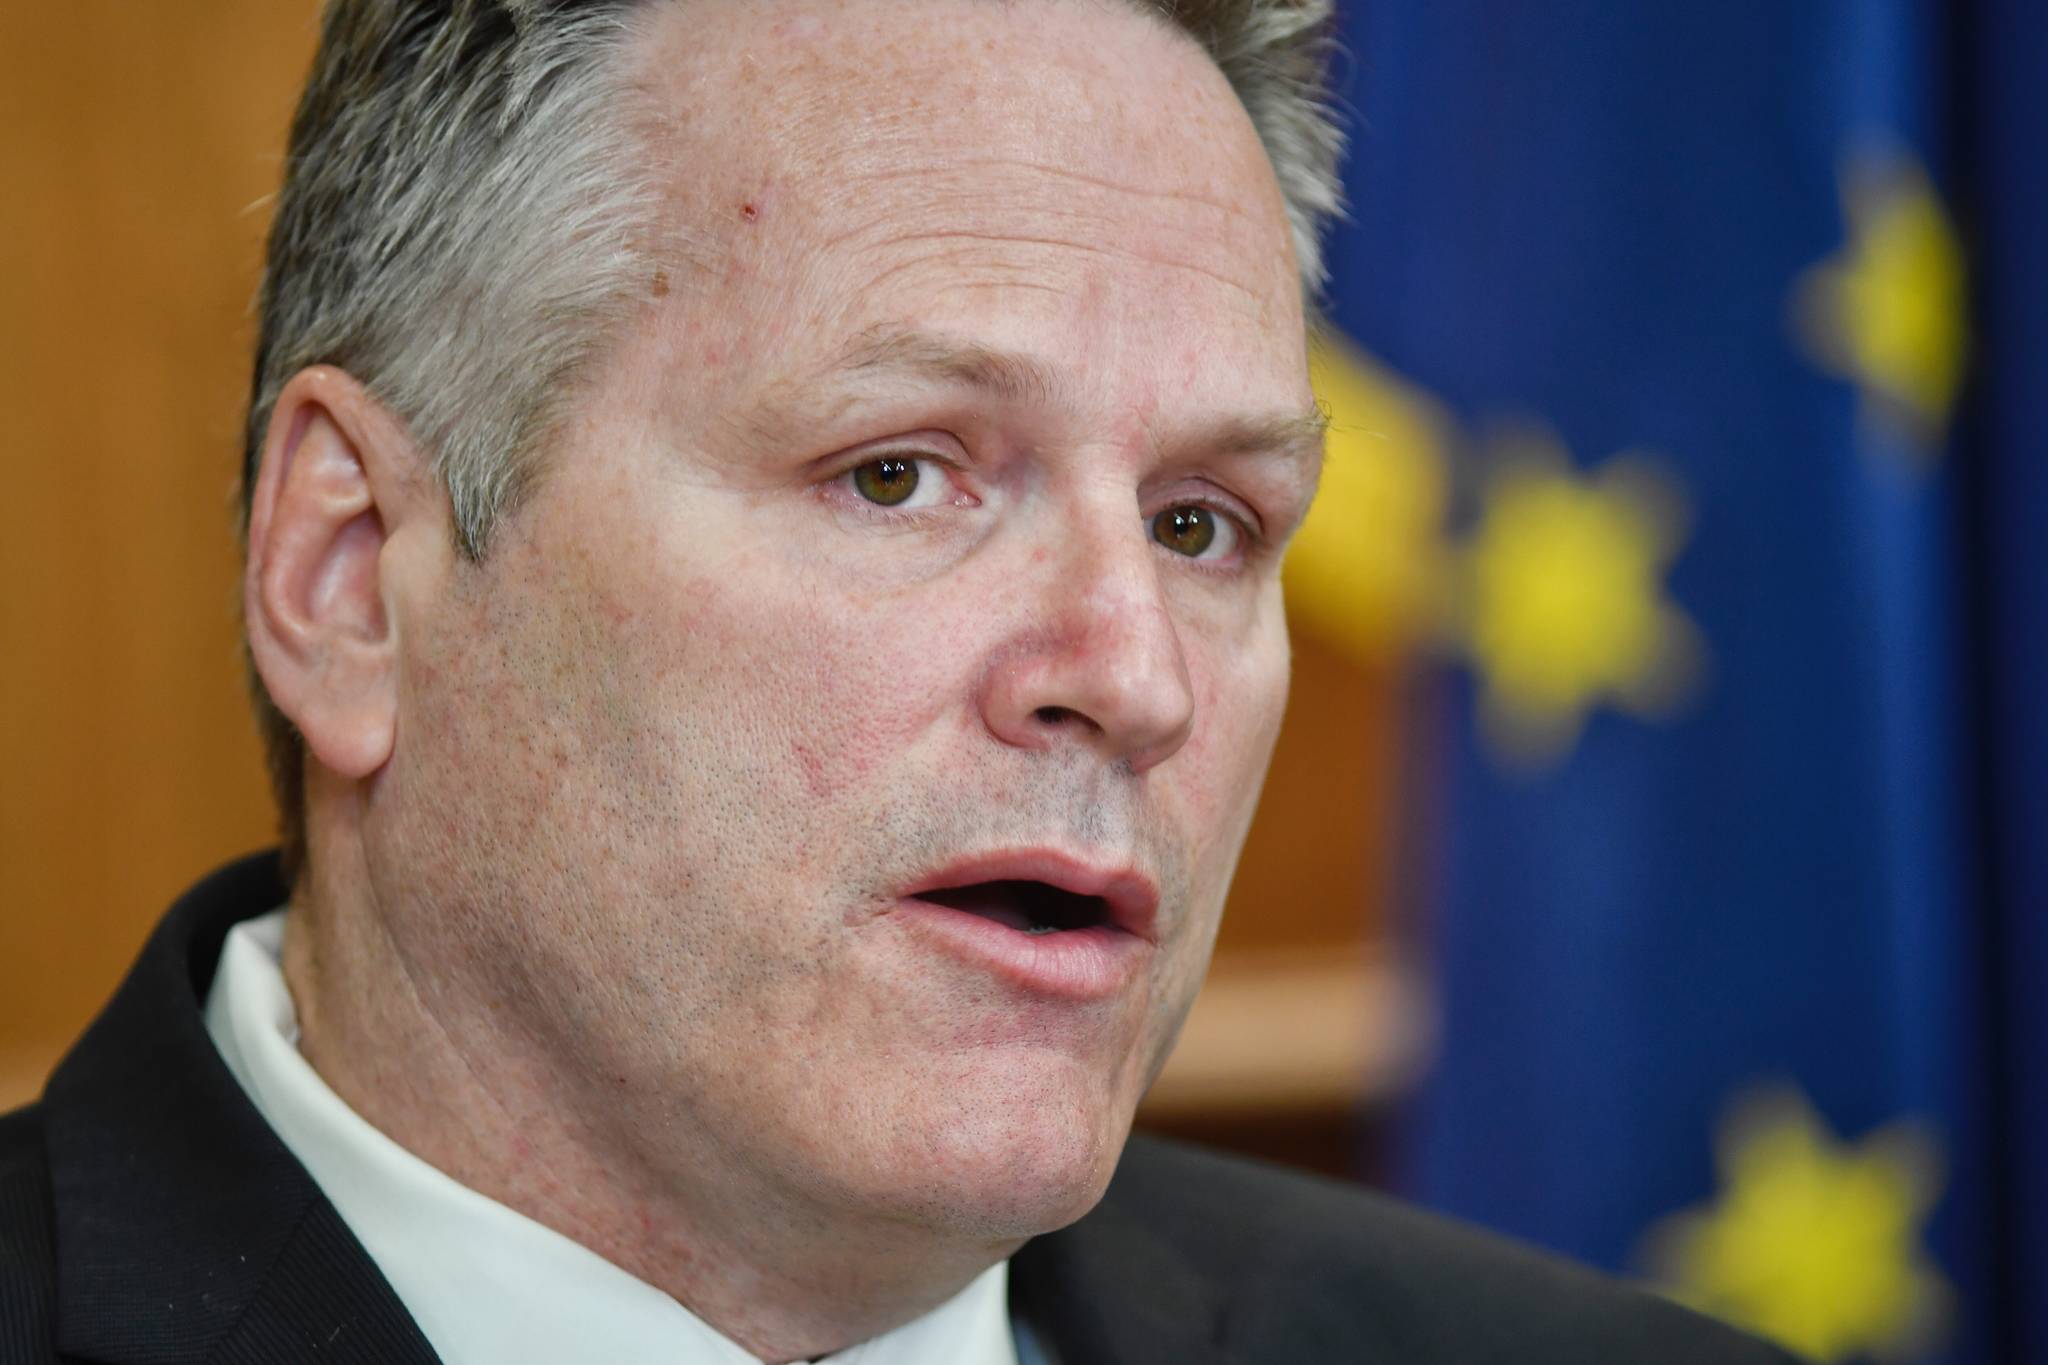 Gov. Mike Dunleavy speaks during a press conference at the Capitol on Tuesday, April 9, 2019. (Michael Penn | Juneau Empire File)